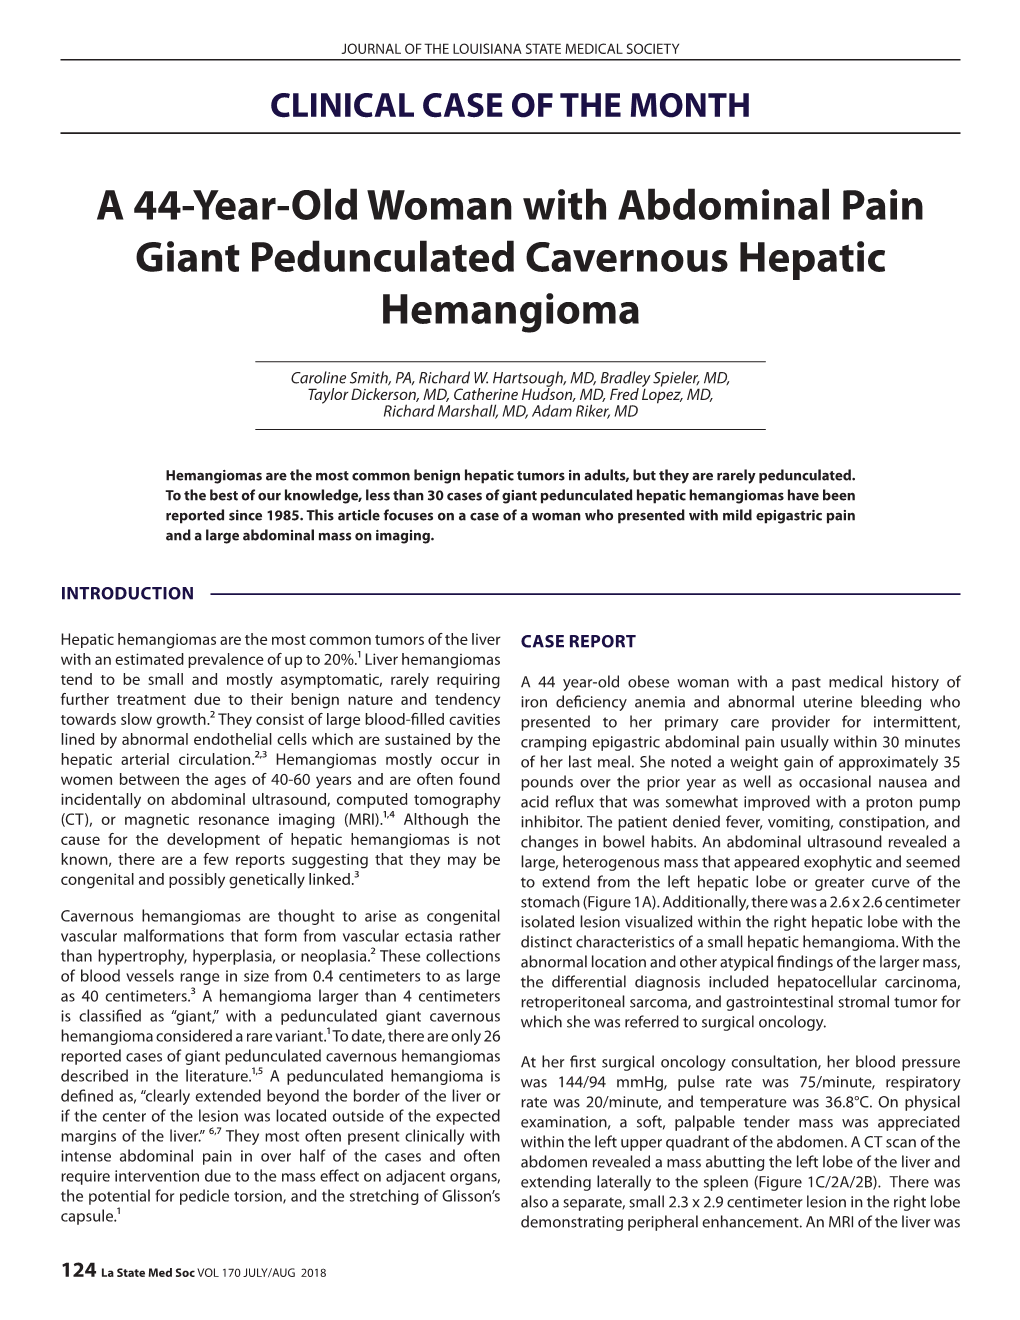 A 44-Year-Old Woman with Abdominal Pain Giant Pedunculated Cavernous Hepatic Hemangioma